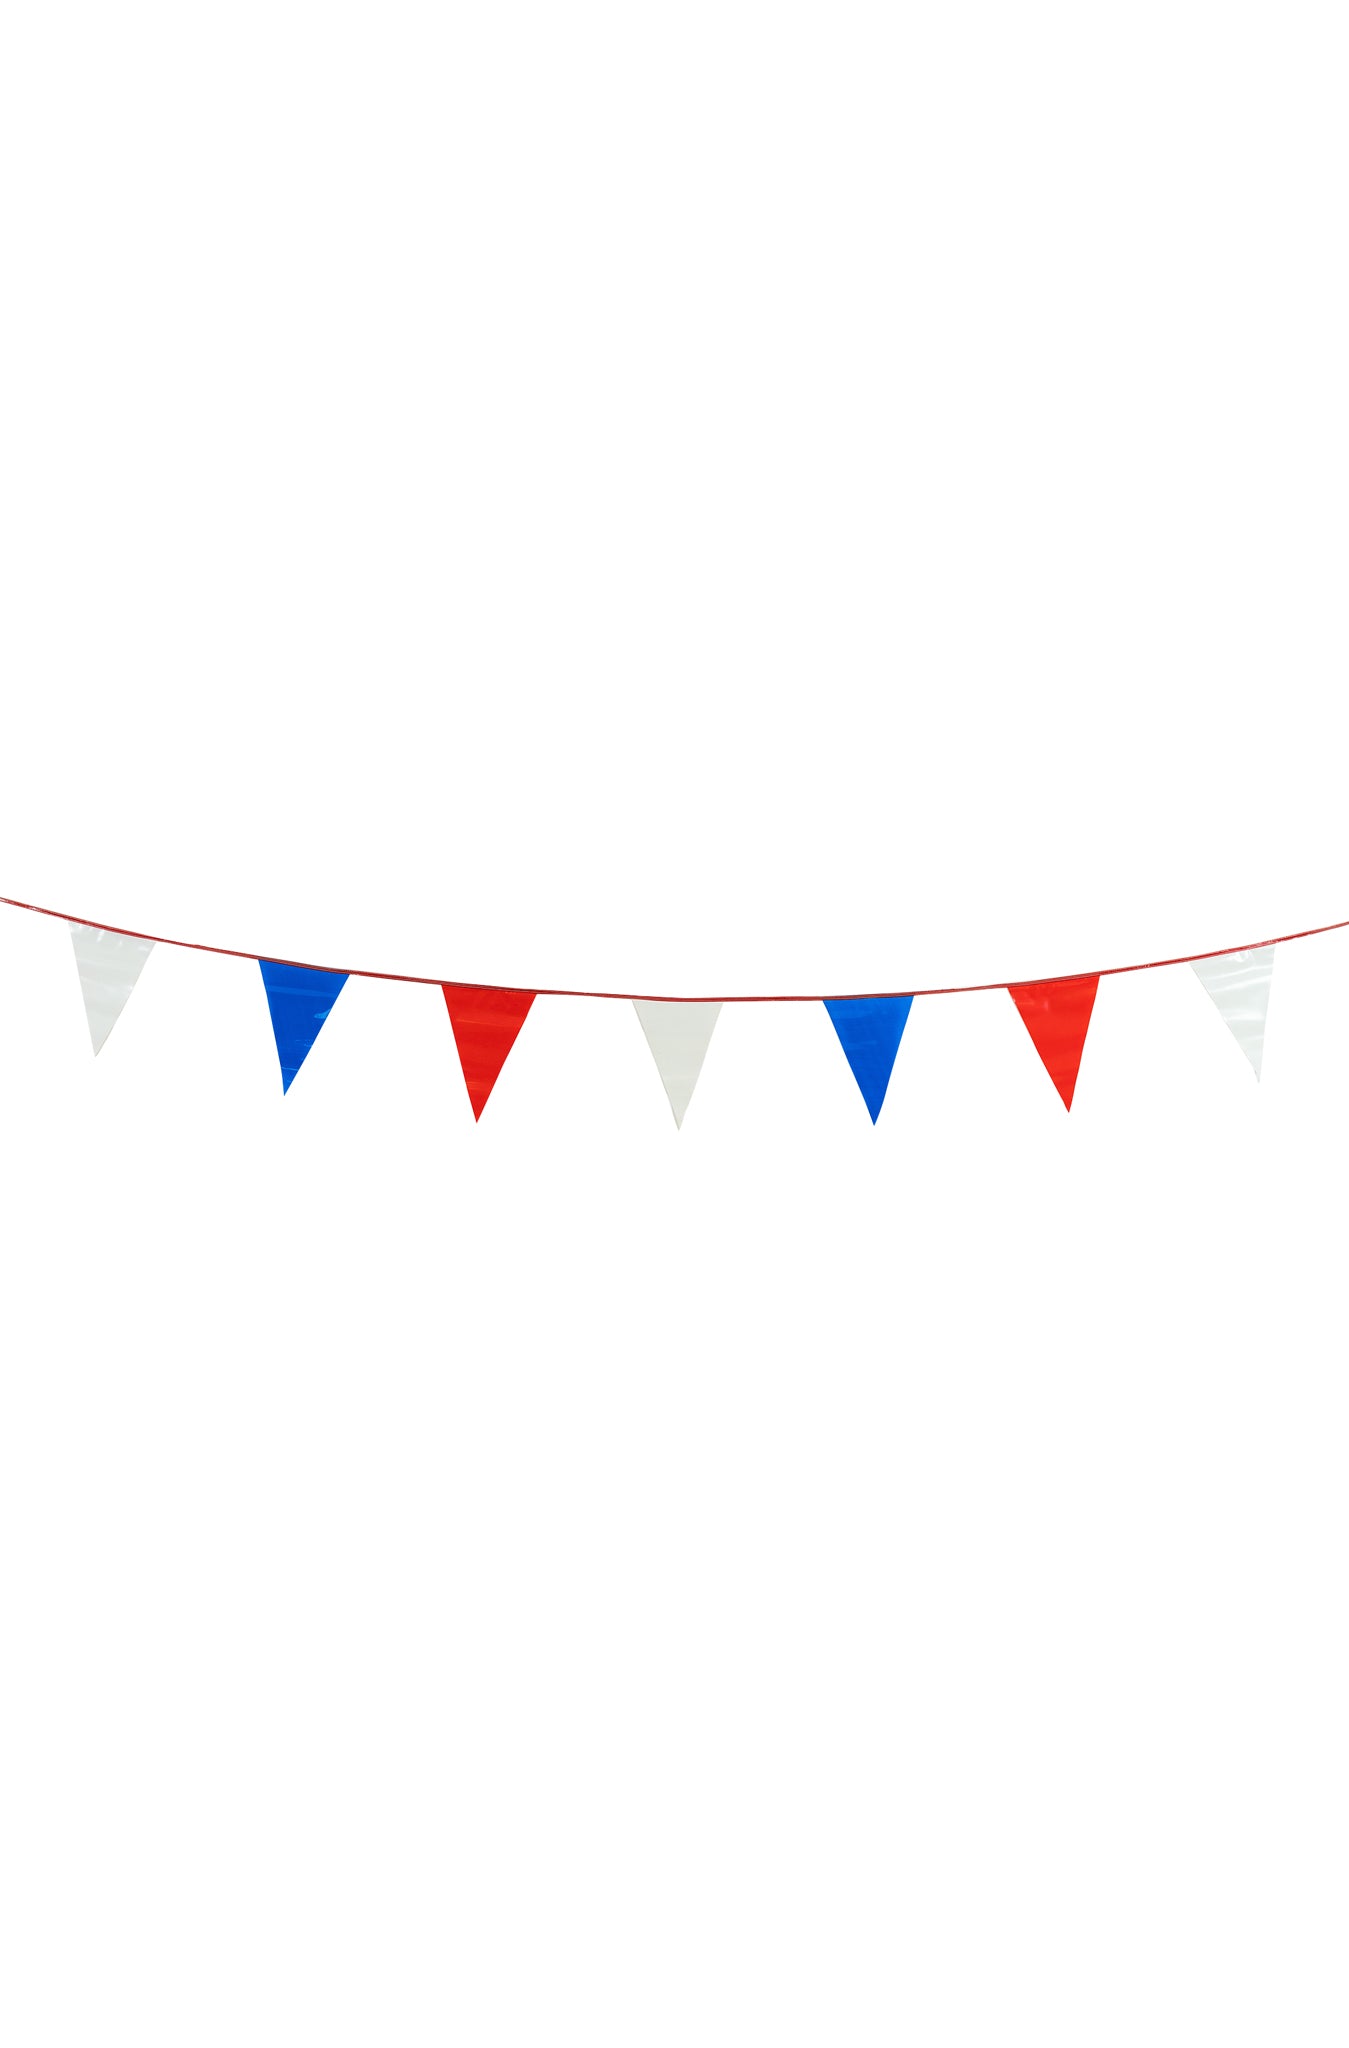 Pennant String Flags - Indoor/Outdoor 